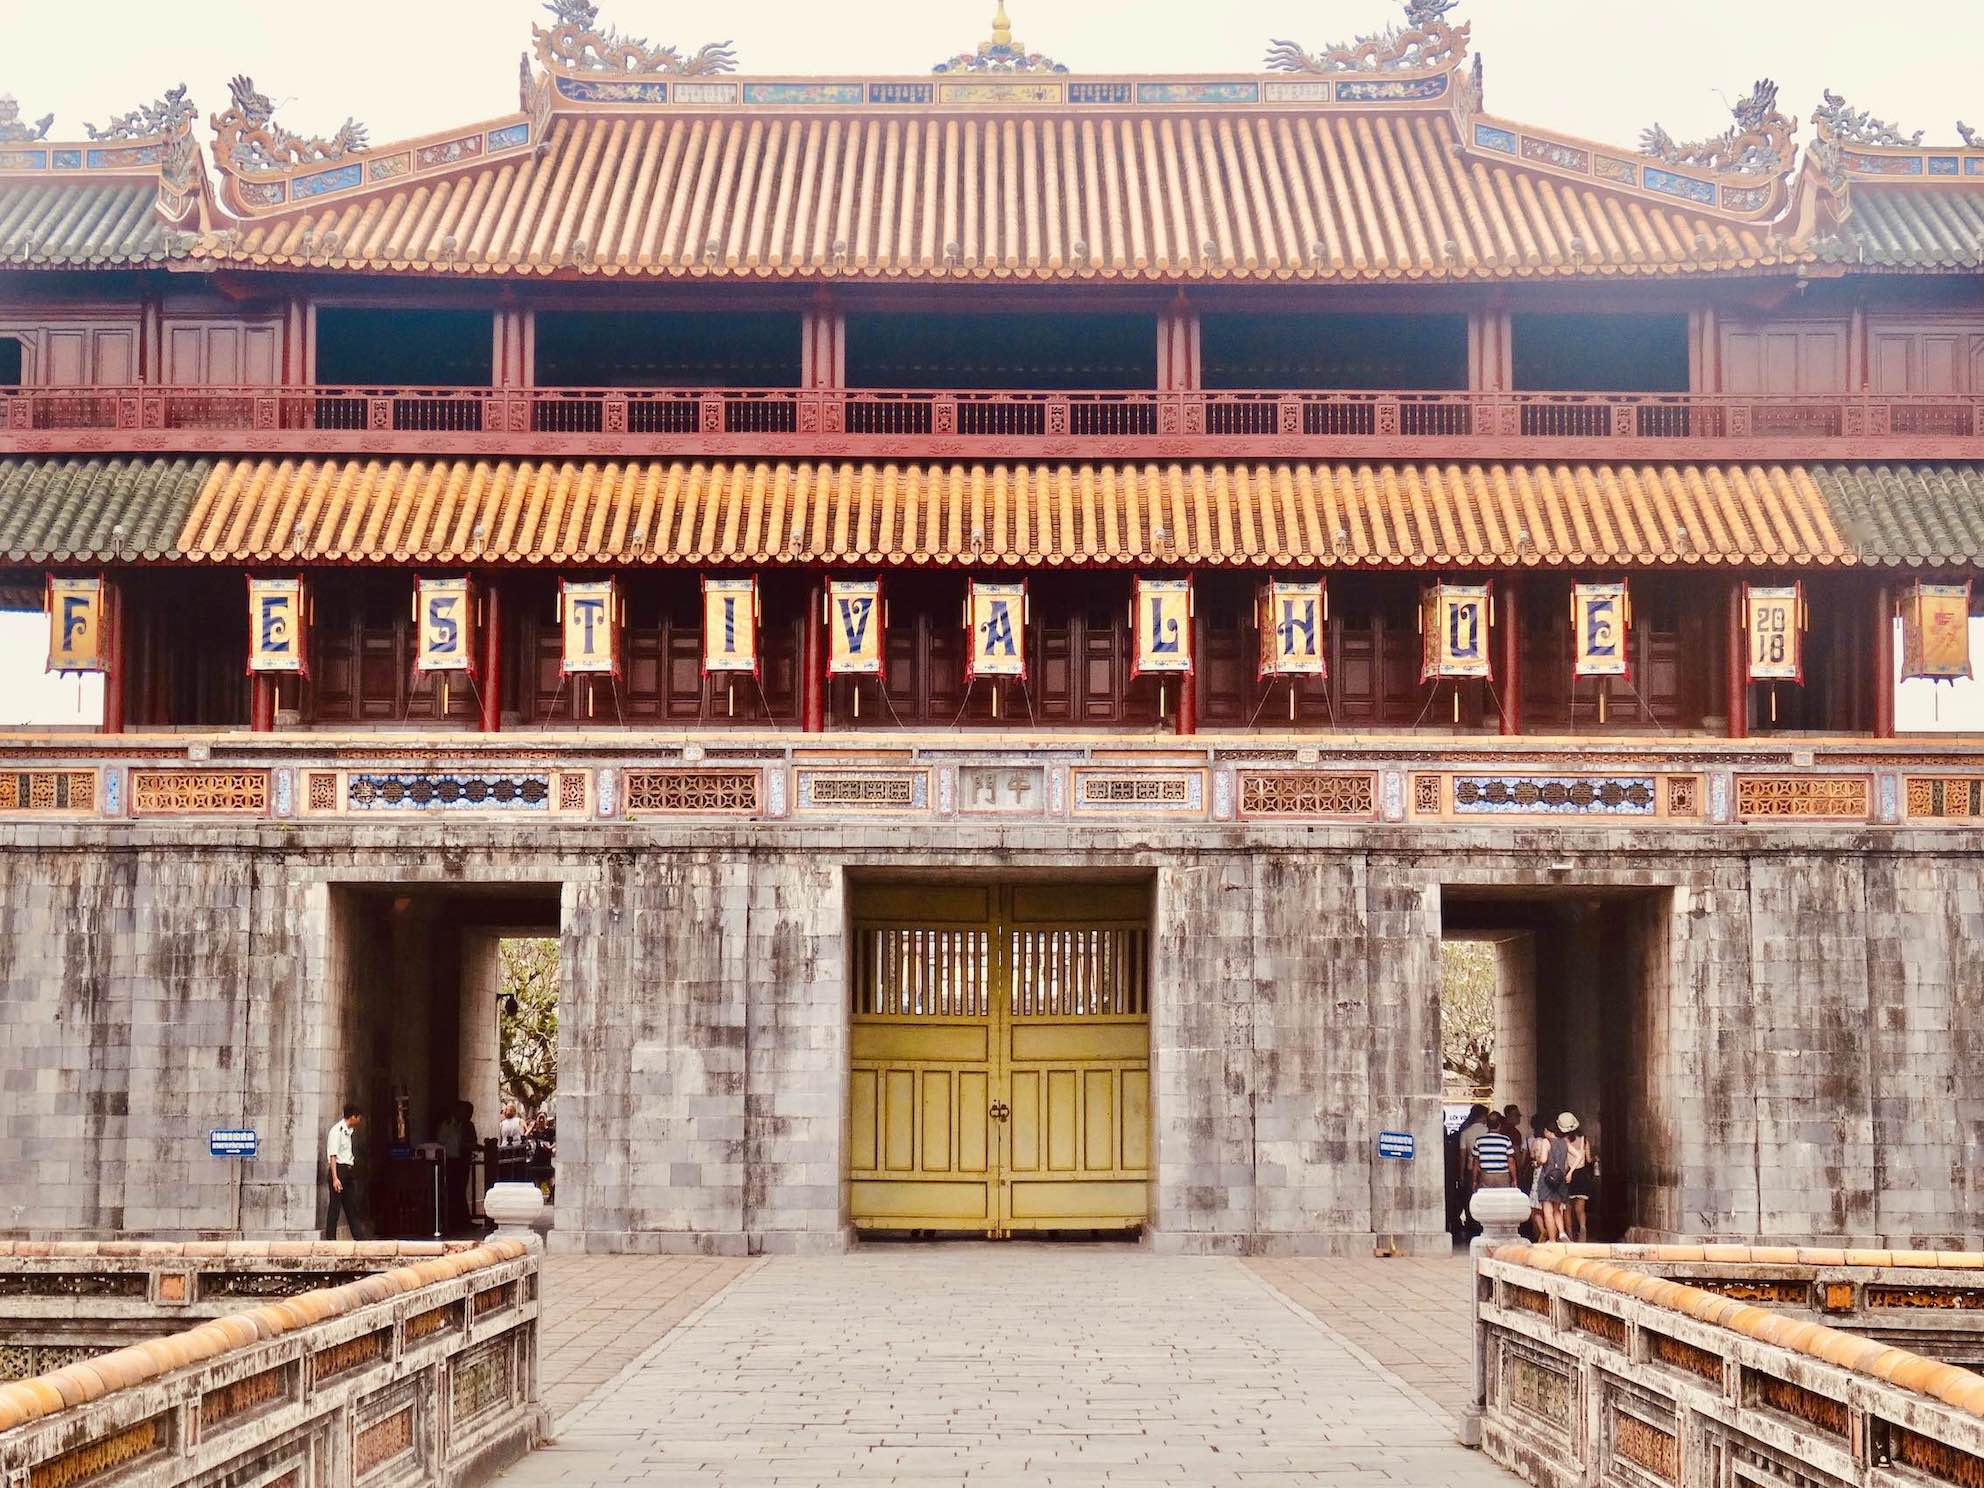 The Imperial City in Hue.